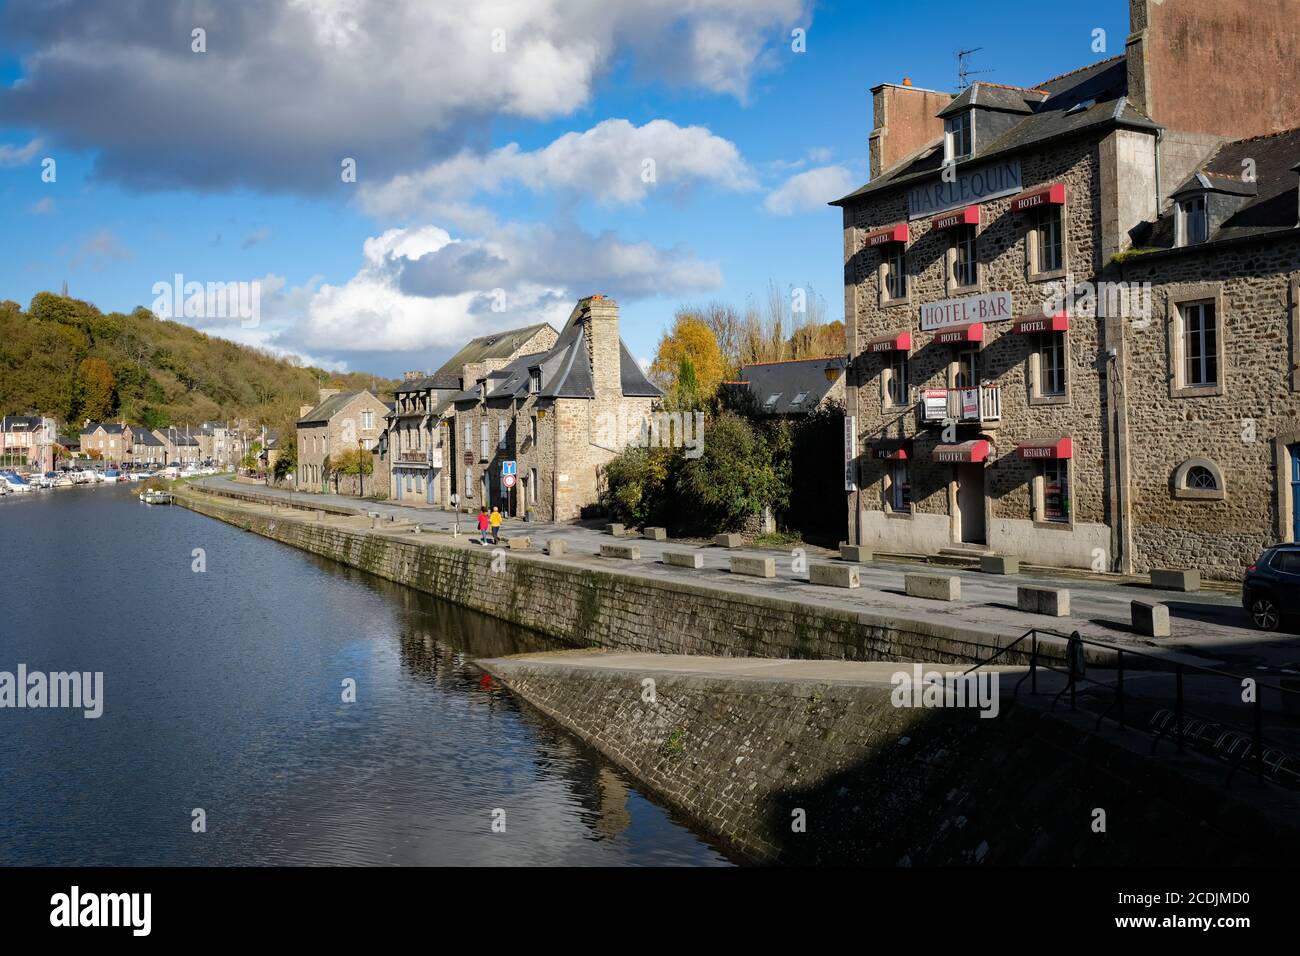 On the Rance River, Dinan, Brittany, France. Stock Photo